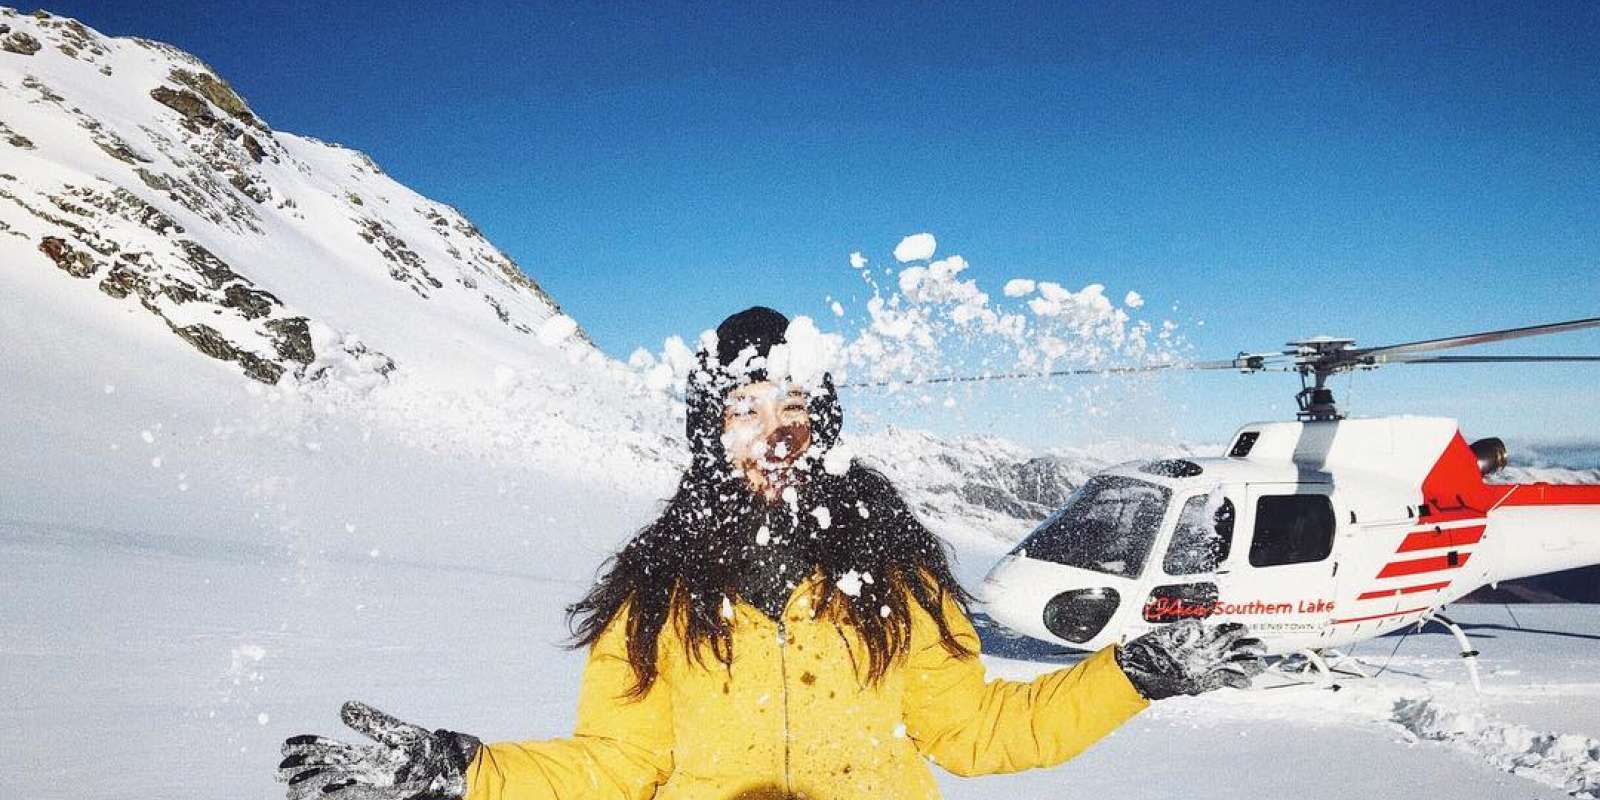 Lady playing in the snow. Glacier landing and snow experience